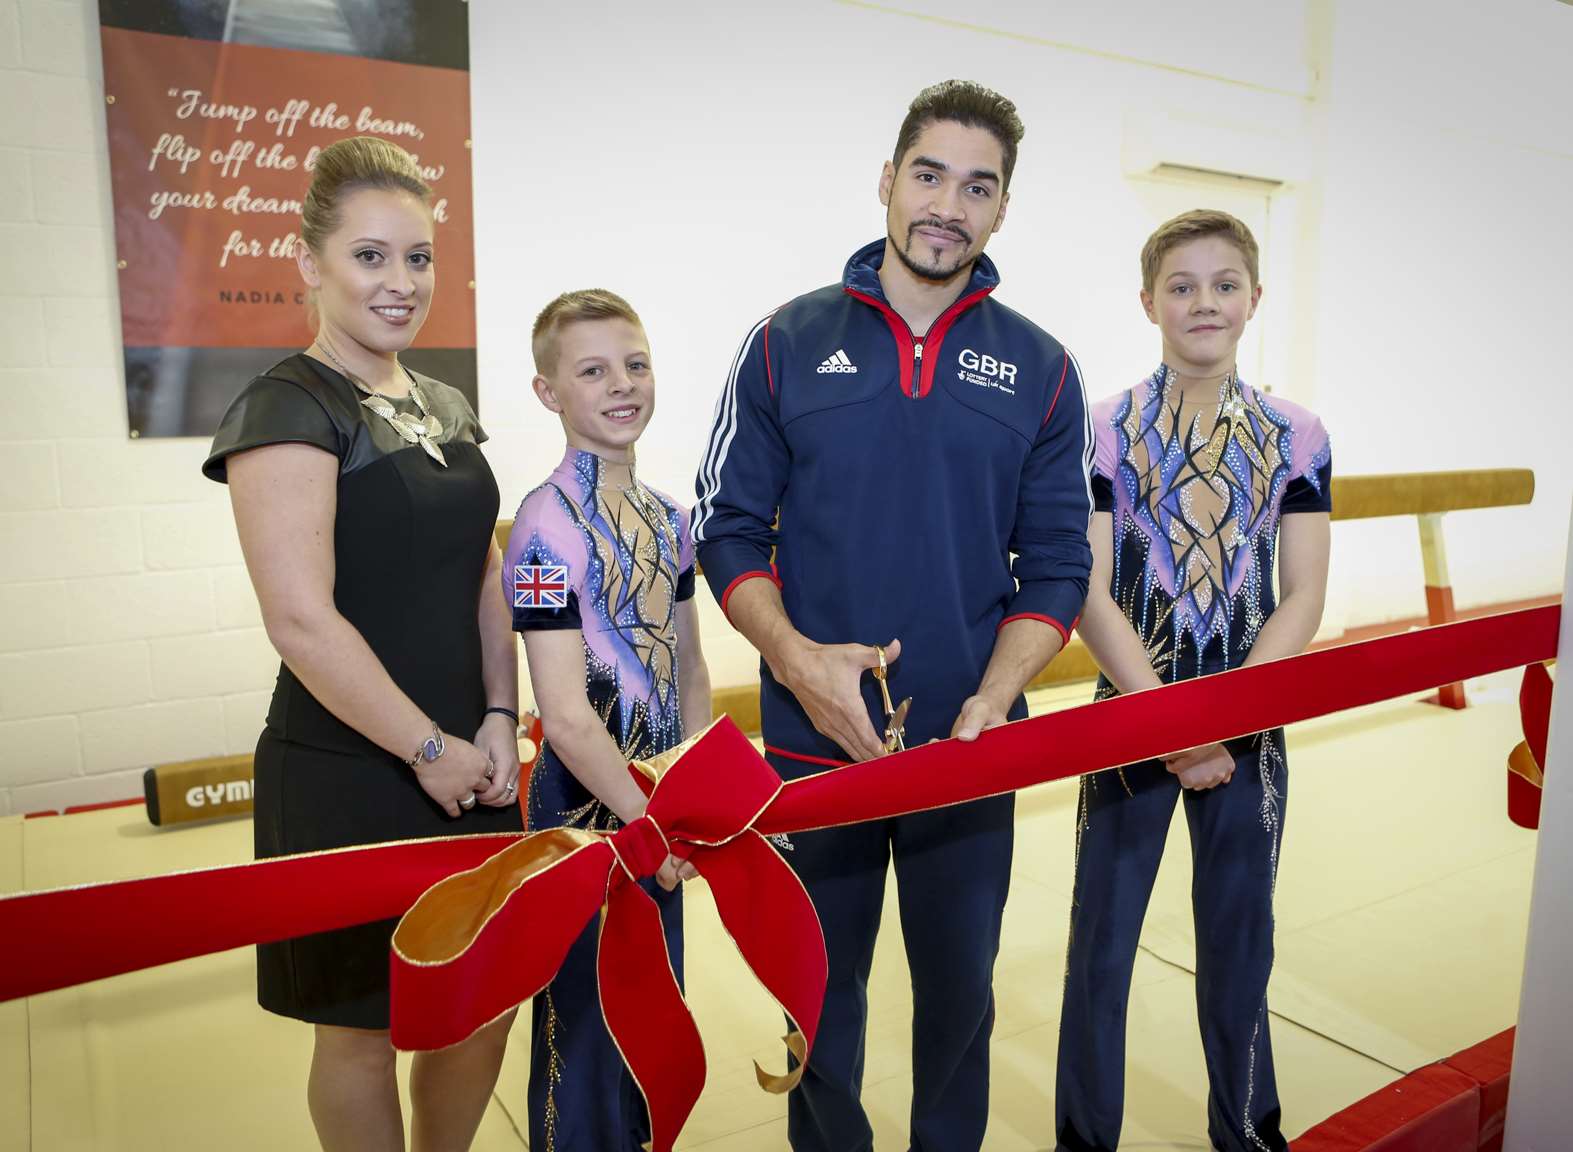 Louis Smith cuts the ribbon to open the new extension at the NDGA with the help of Hector Kinghorn (left) and Sam Large and watched by Amy Battell